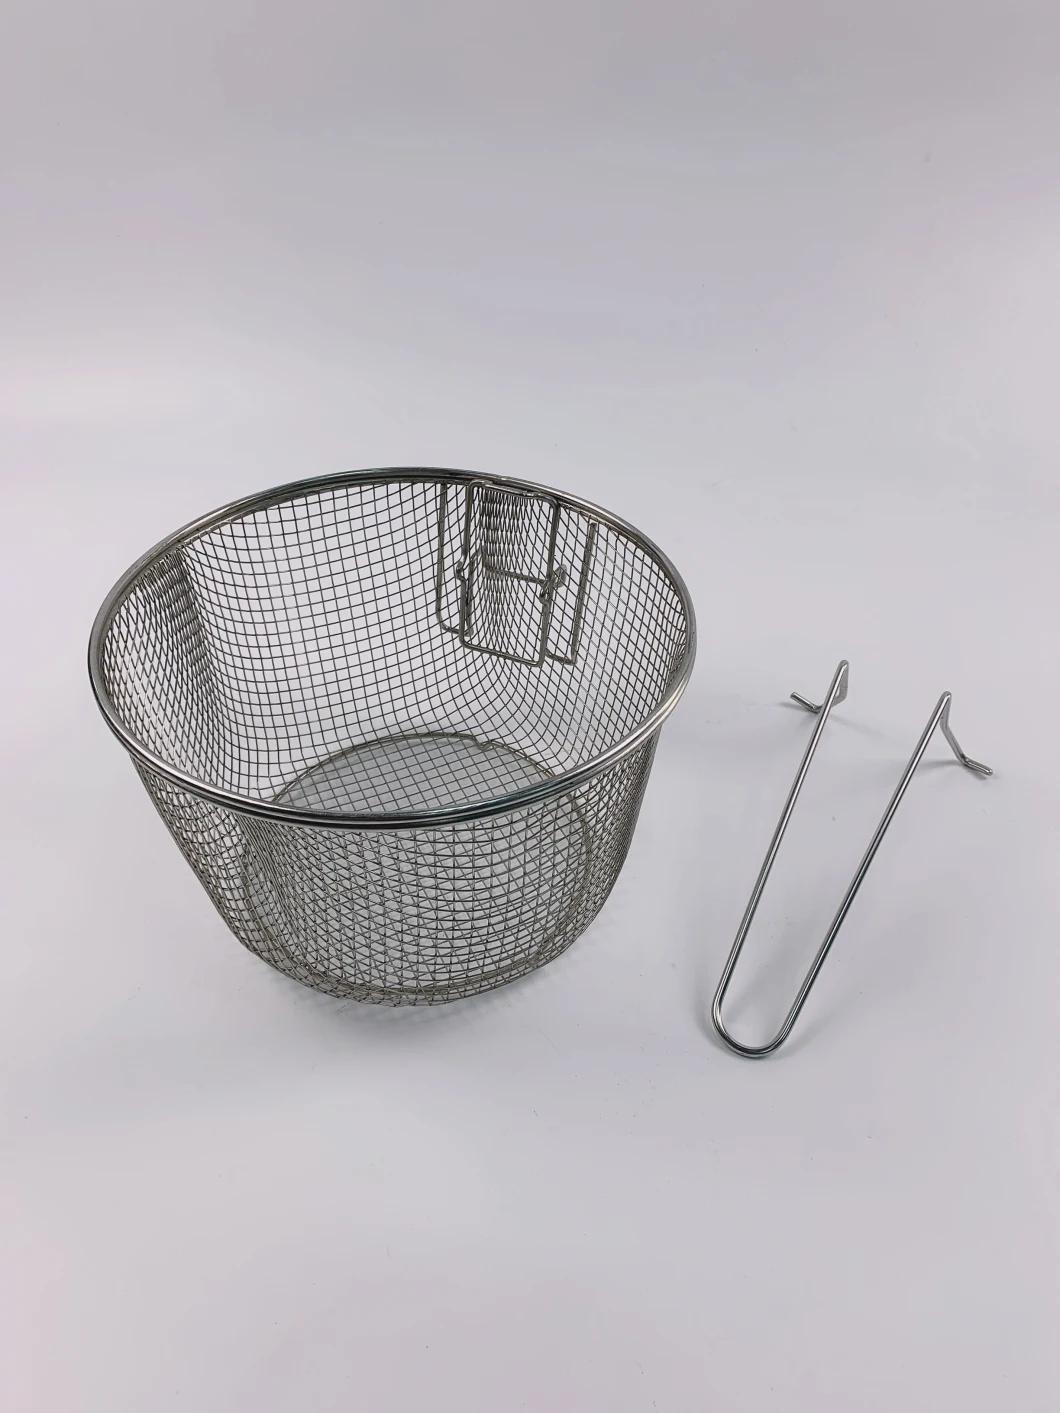 Stainless Steel Round Deep Fry Basket with Kd Handle